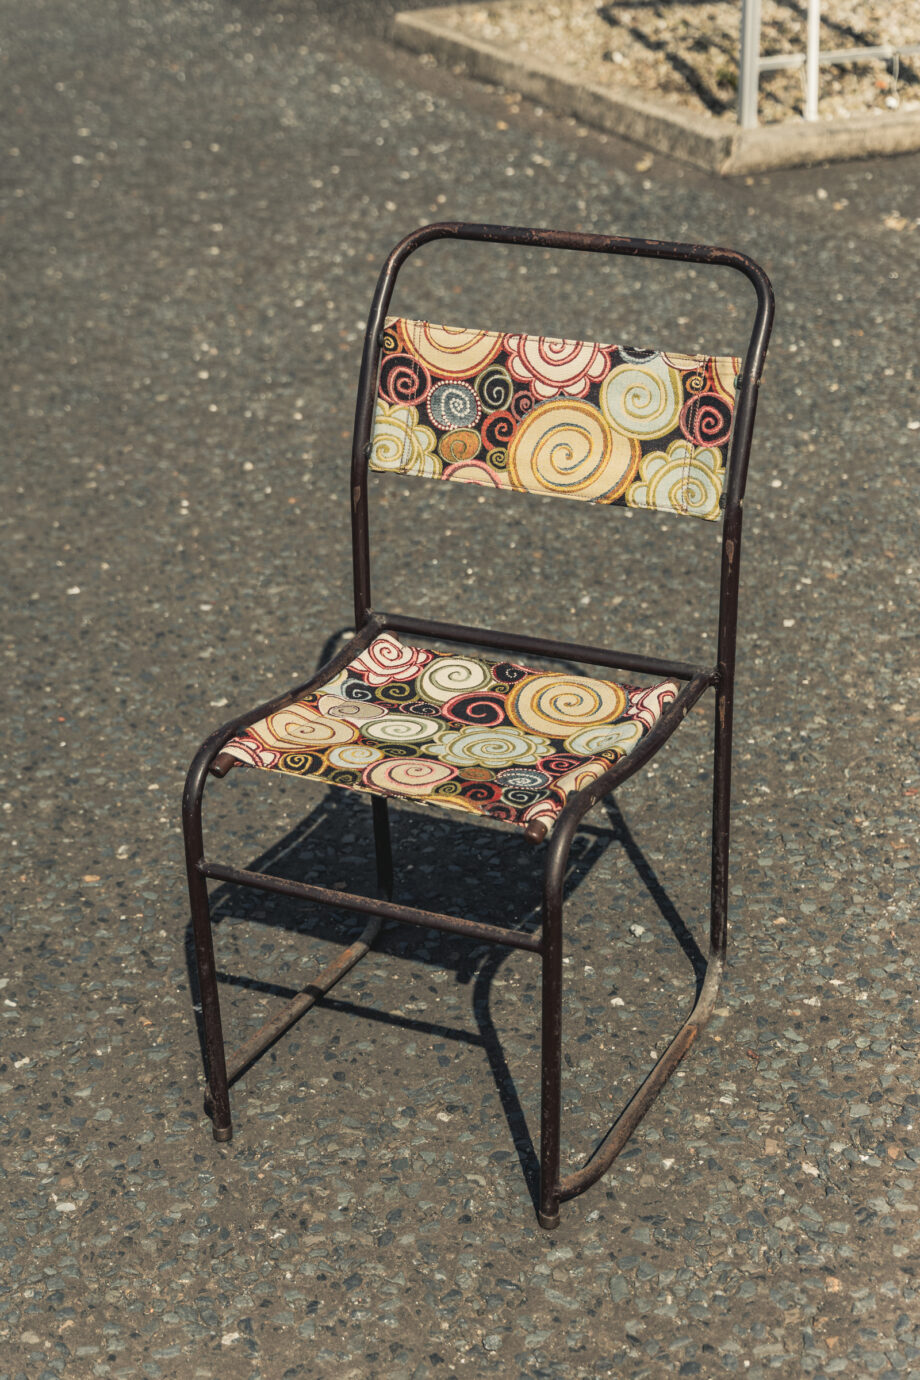 A metal chair with a reupholstered back and seat in a colourful spiral fabric